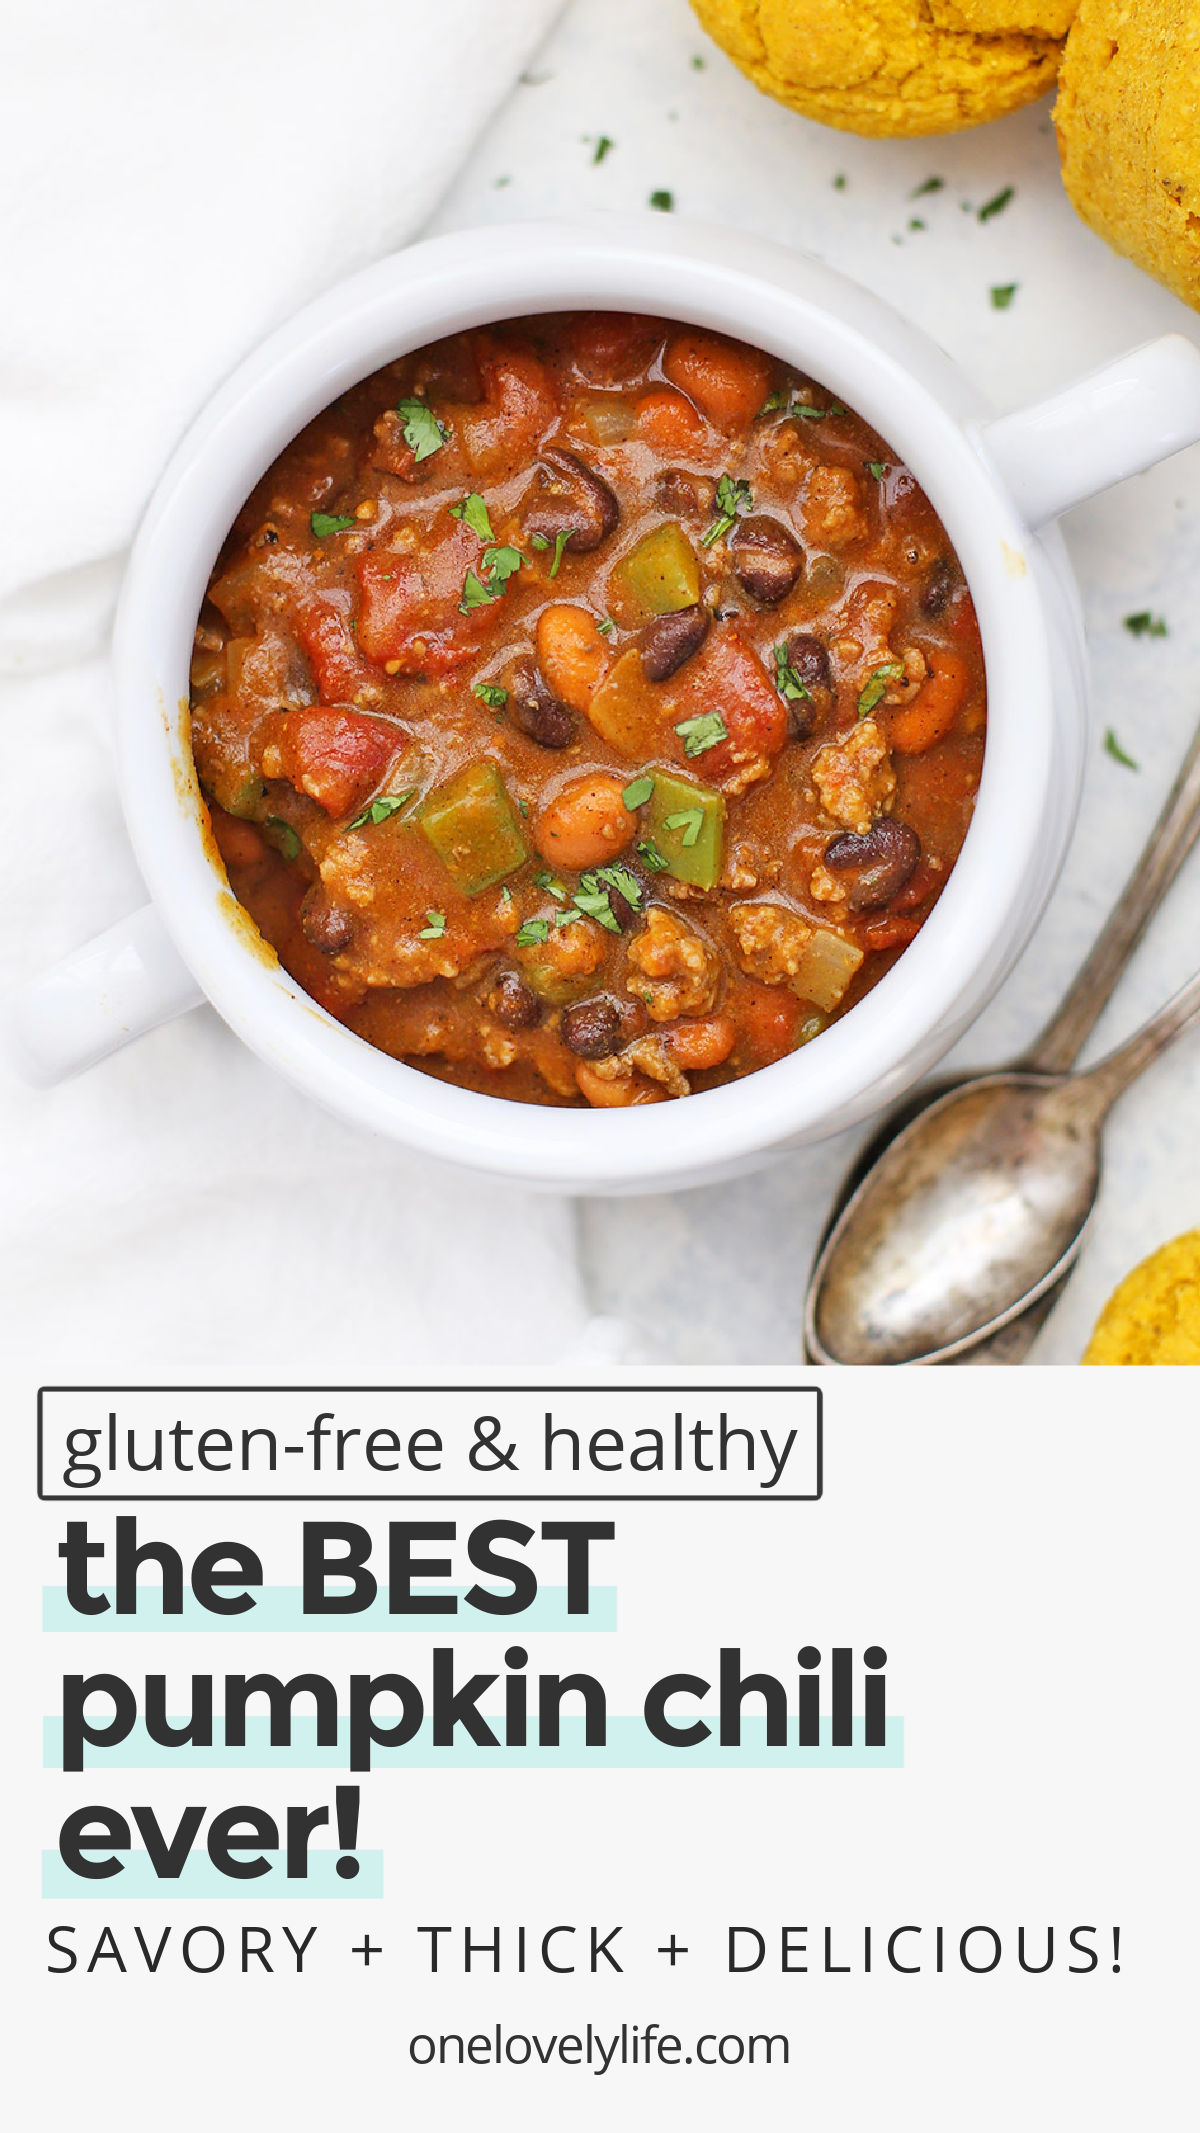 The BEST EVER Pumpkin Chili - This healthy pumpkin chili recipe might just win you a prize! (gluten-free, paleo-friendly and vegan-friendly!) // savory pumpkin recipes // pumpkin soup // how to make pumpkin chili // chili cook-off winner